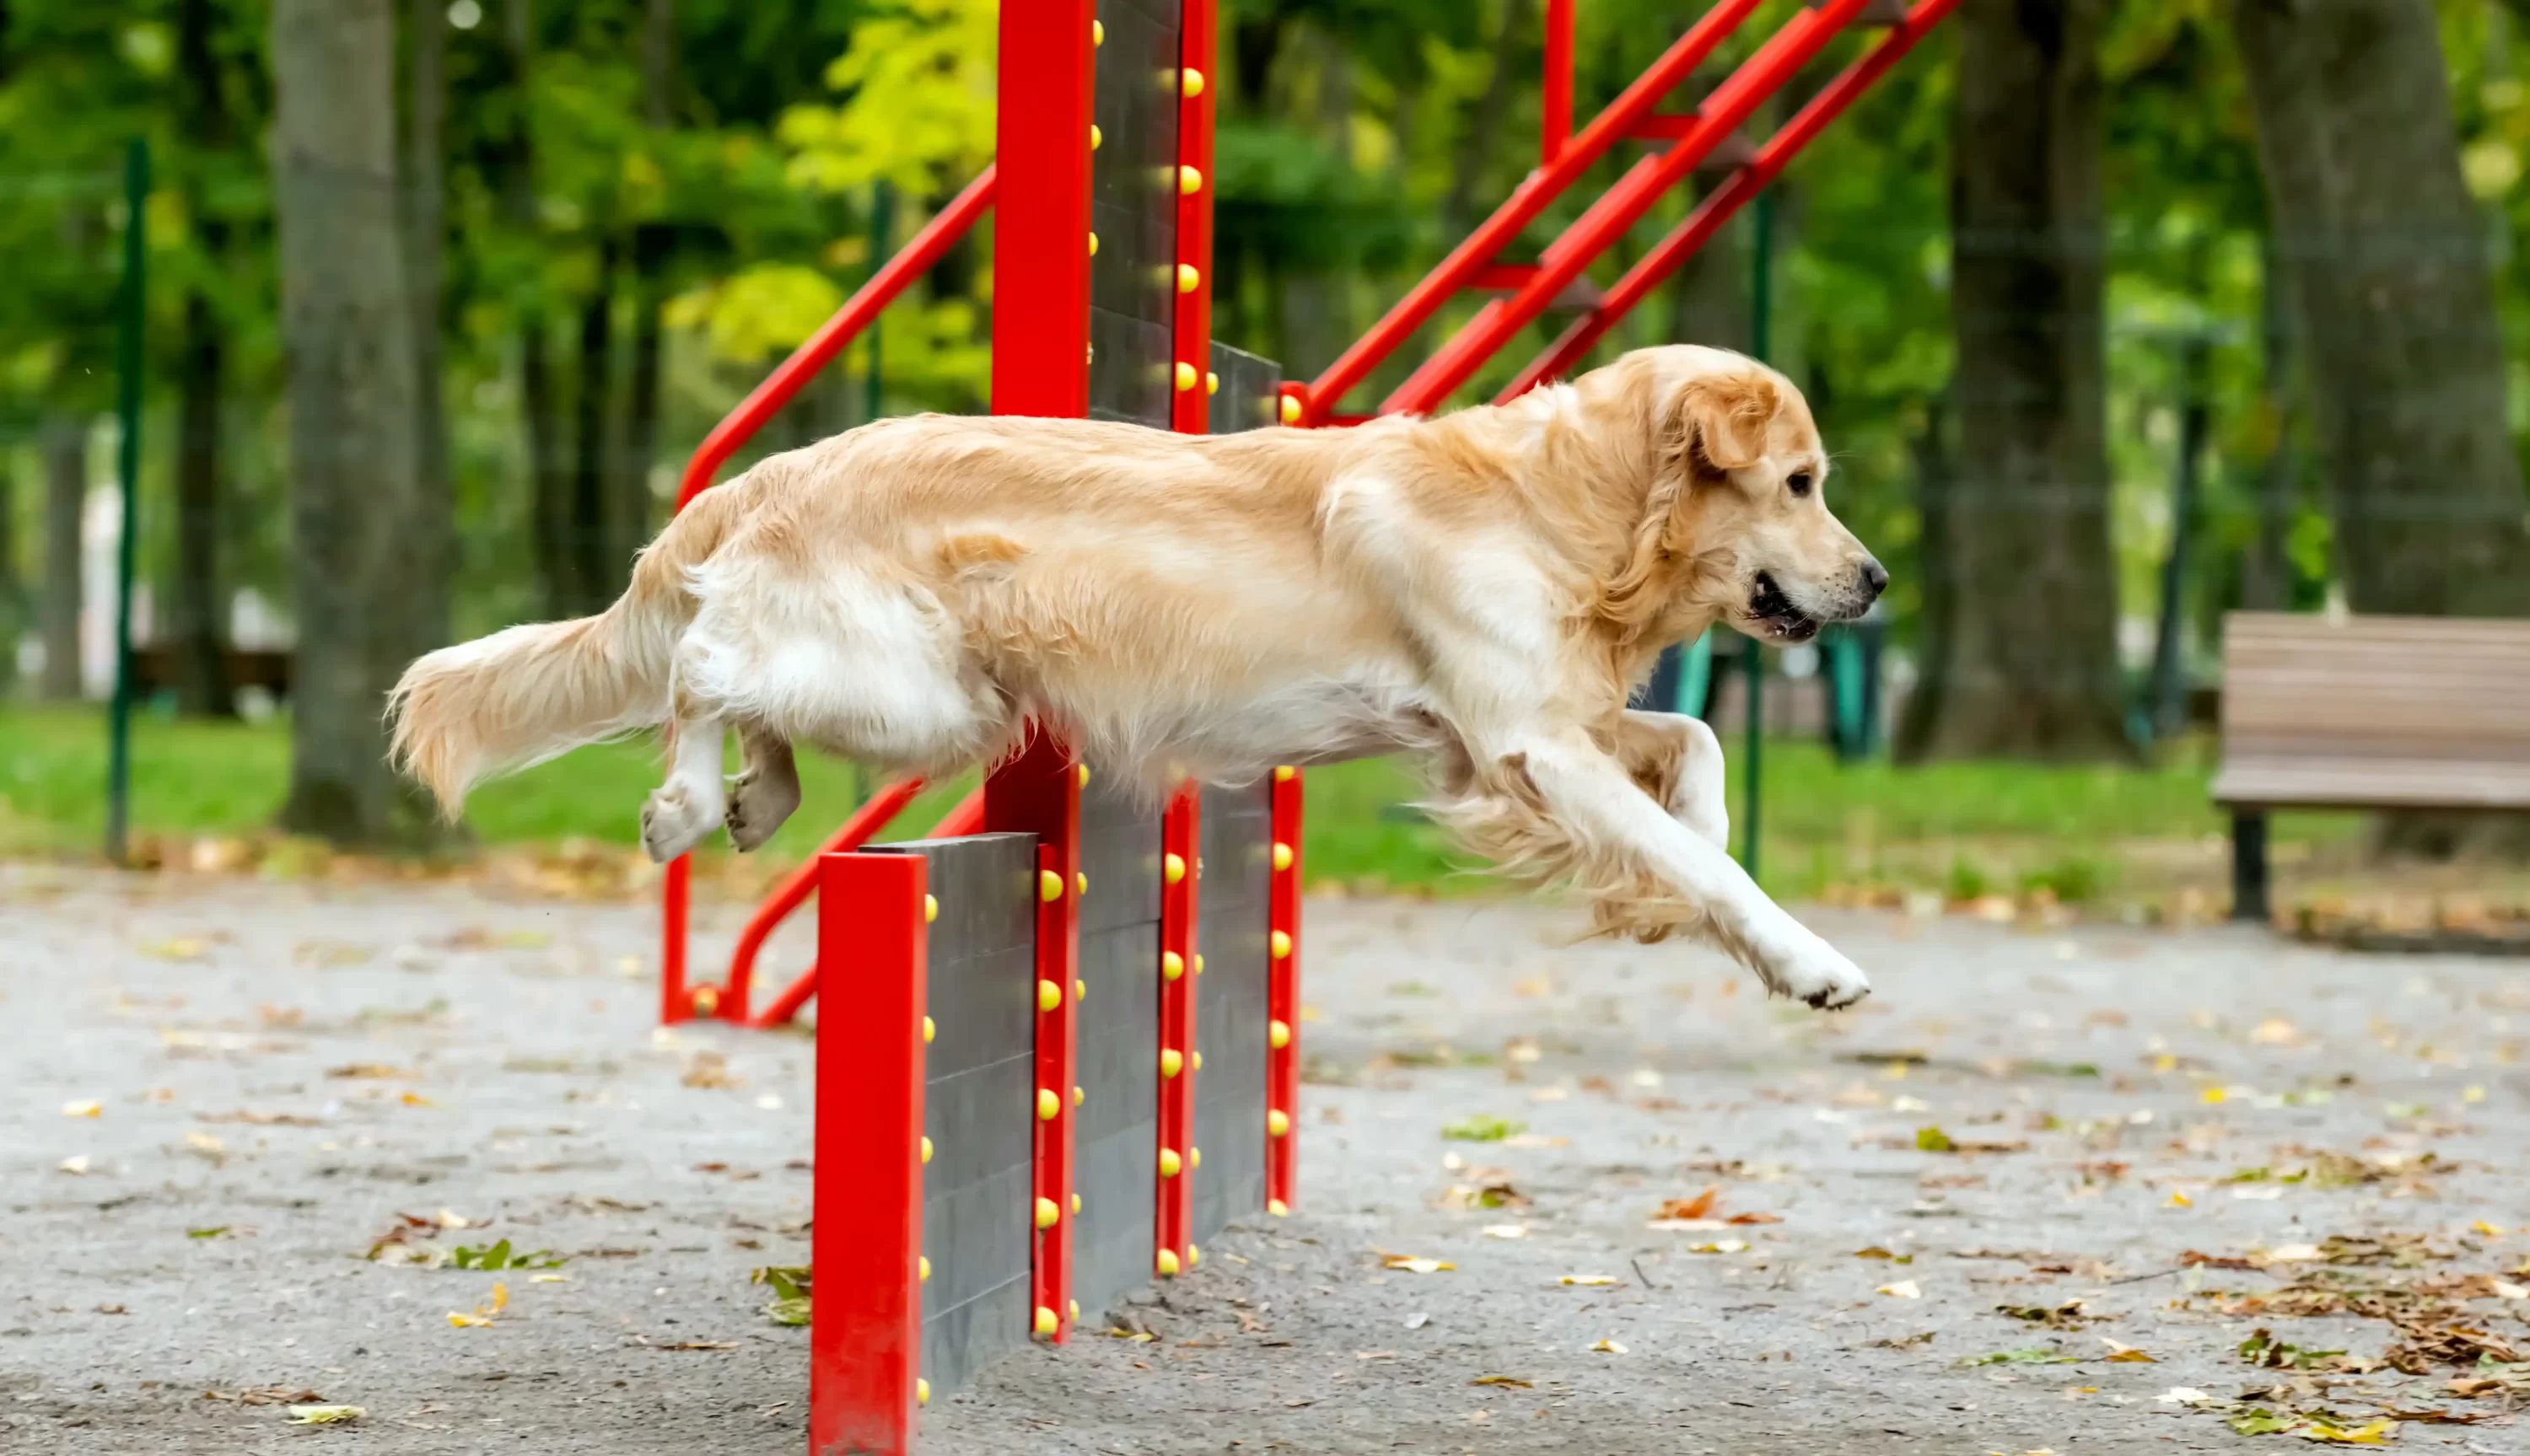 Dod exercising on obstacle course. Dog workouts. Pets24